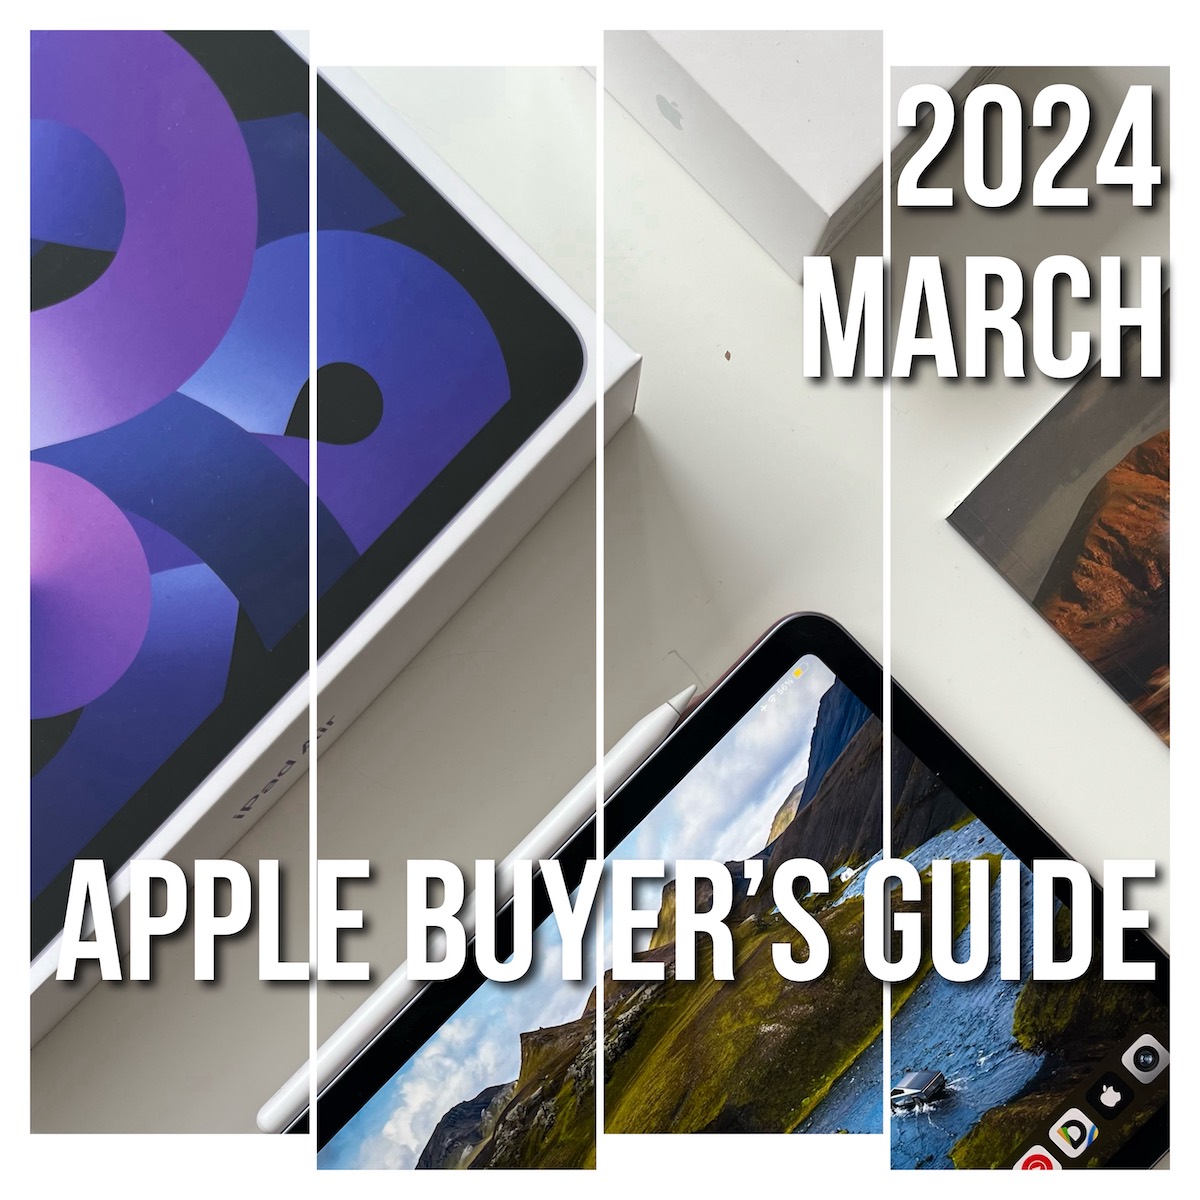 Apple Buyer’s Guide for March 2024. Updated.